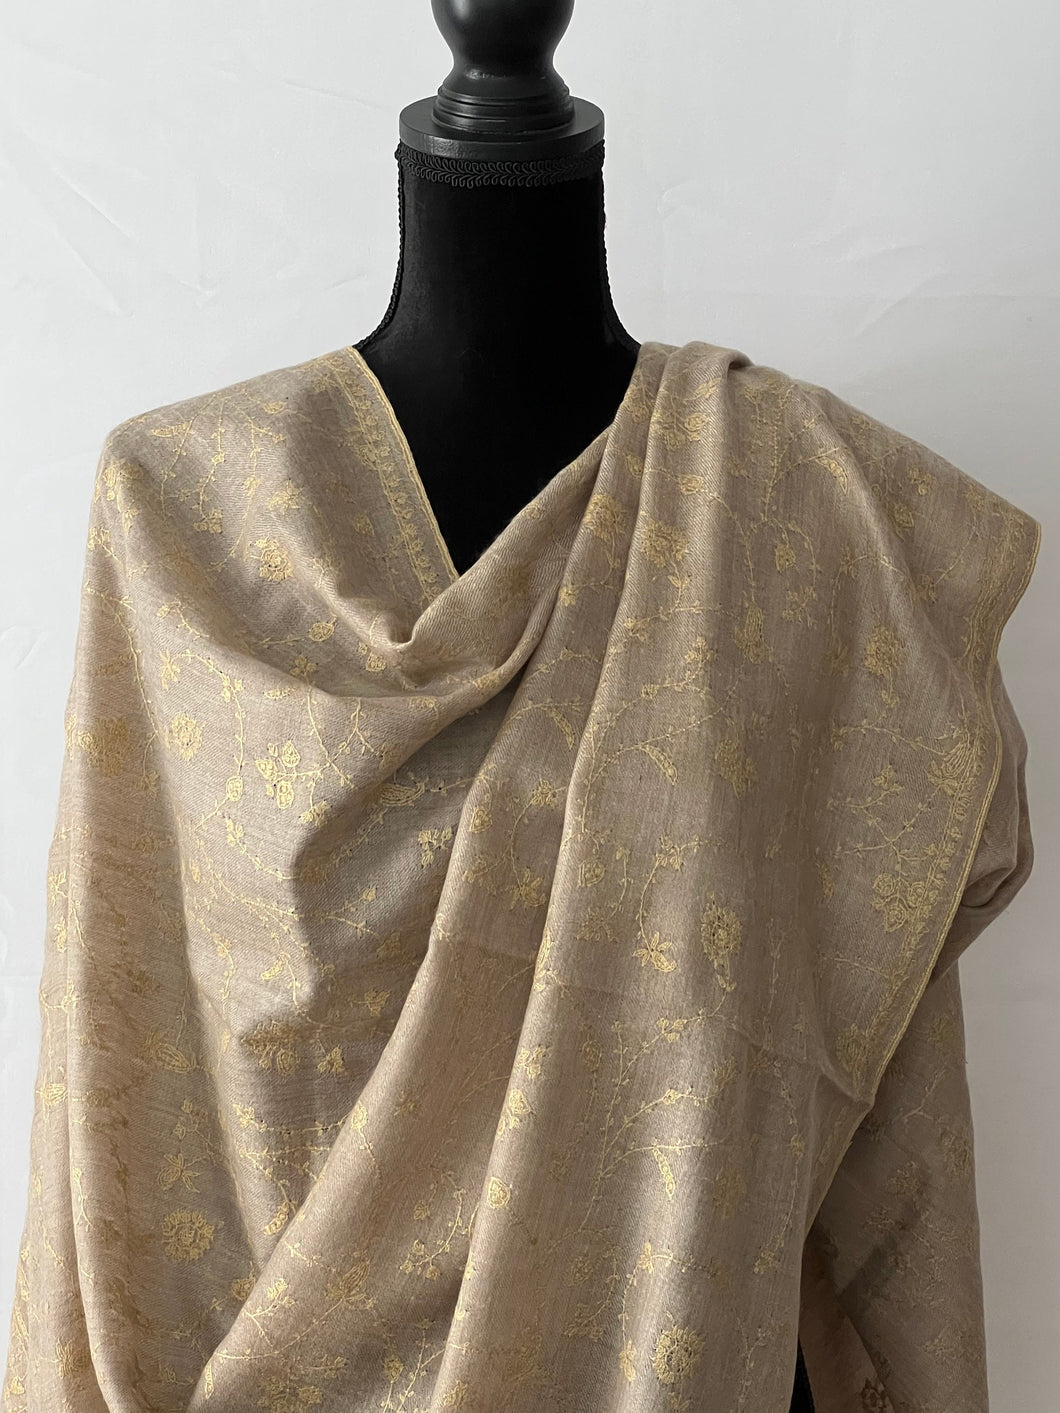 Jali Embroidered Pure Pashmina (100% Cashmere) - Extra Large Hand Woven and embroidered Kashmiri Shawl, all over embroidery